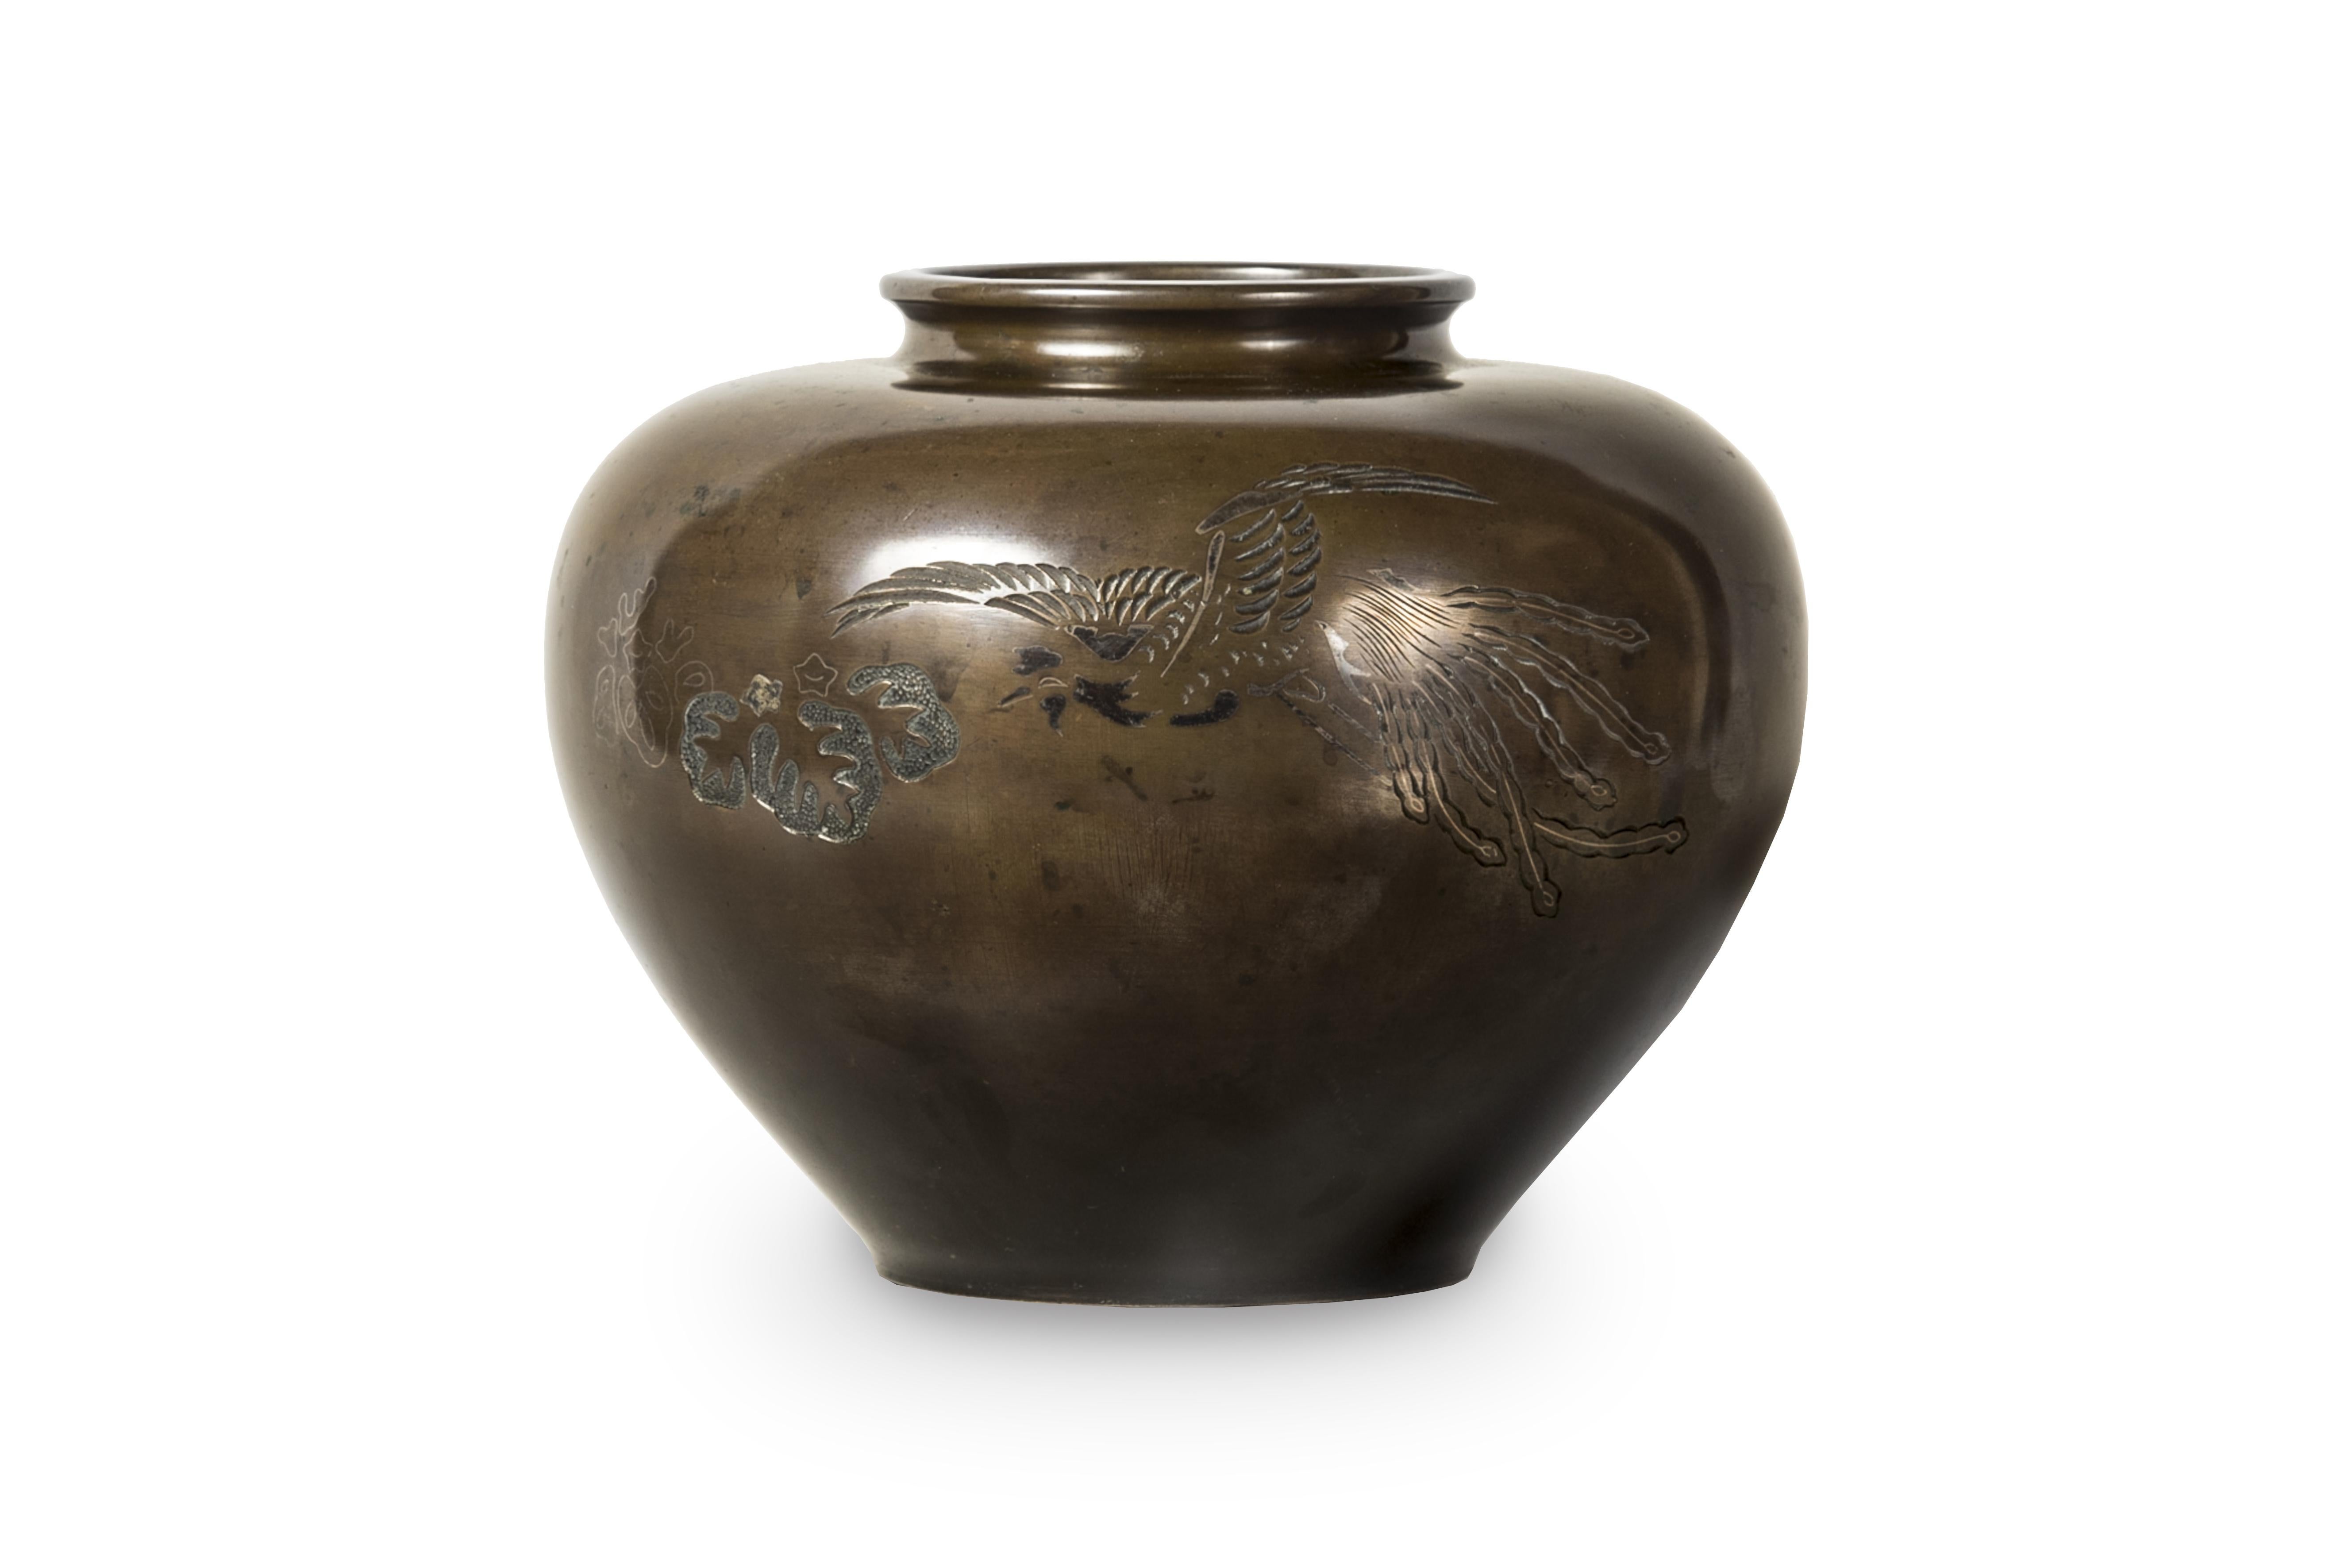 Patinated bronze vase decorated with a flying phenix and paulownia leaves. 
It comes with its tomobako marked with the date Shôwa 5 (1930).

Japan, Shôwa period (1926-1989), 1930

Height : 8.27” (21 cm) -Width : 9.05” (23 cm) - Diameter of the